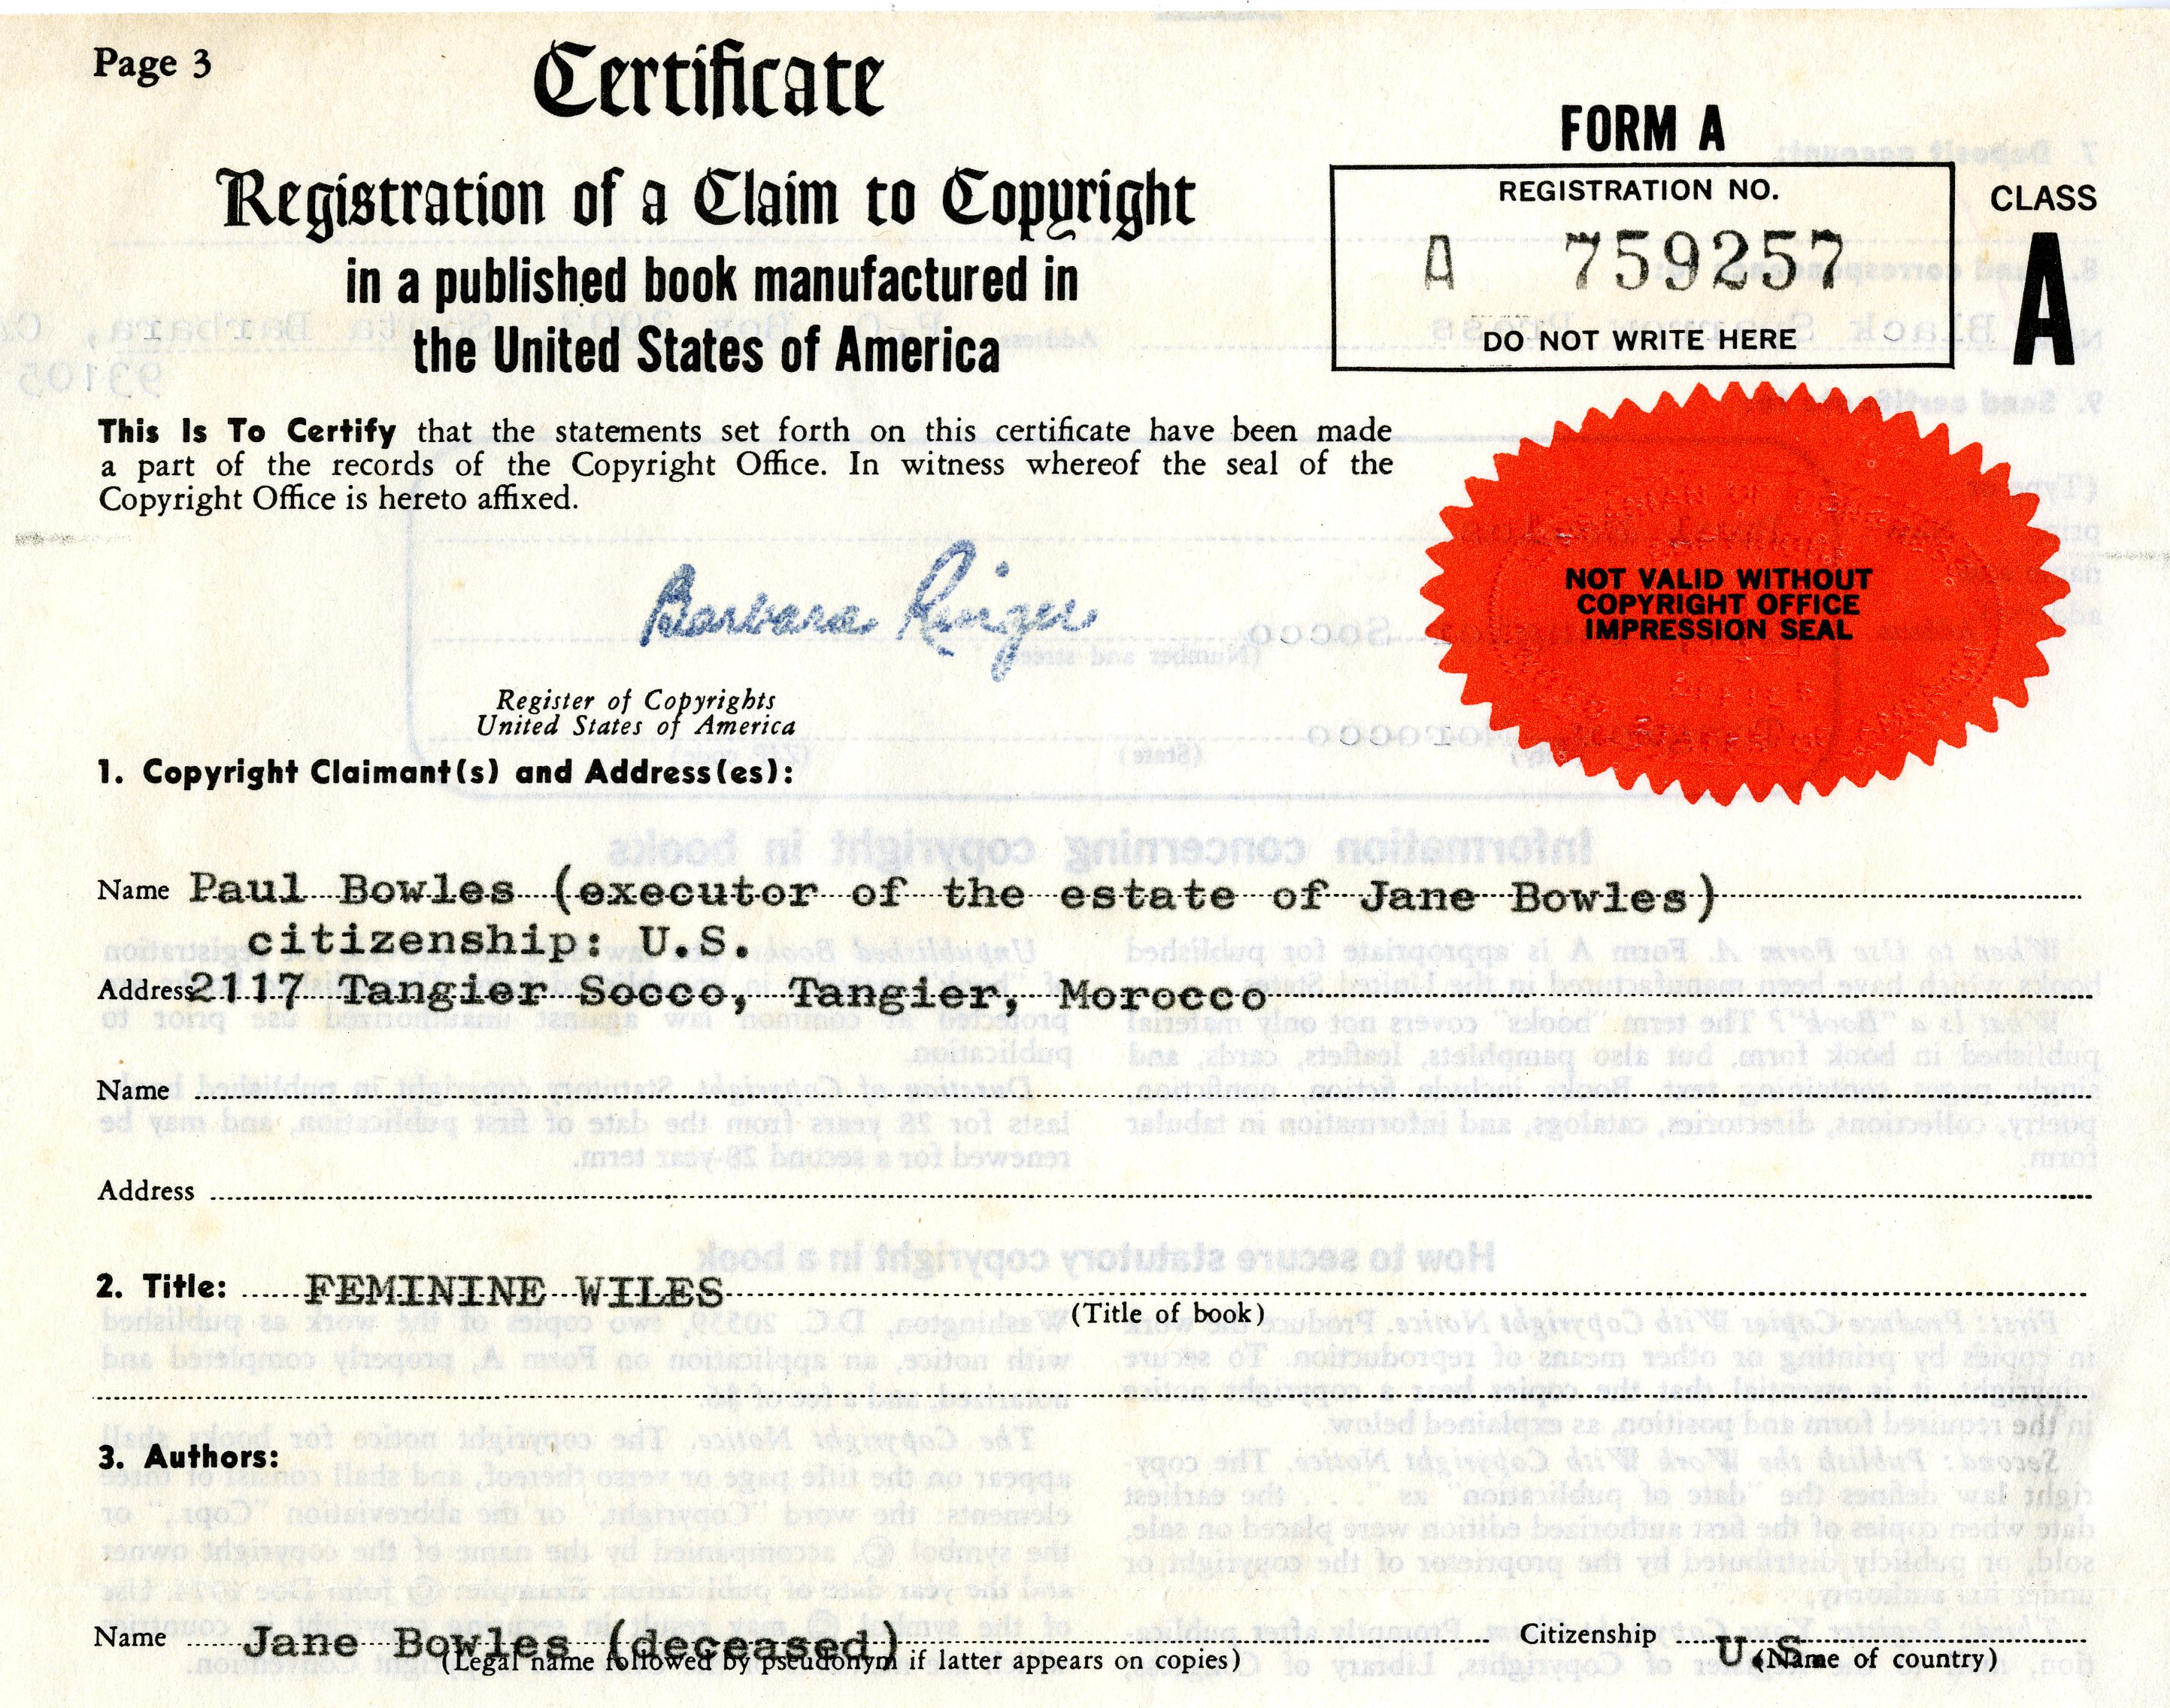 United States Copyright Office, Library of Congress. Certificate of copyright registration for Out in the World: Selected Letters of Jane Bowles, 1935-1970, April 9, 1985, from the Paul Bowles papers